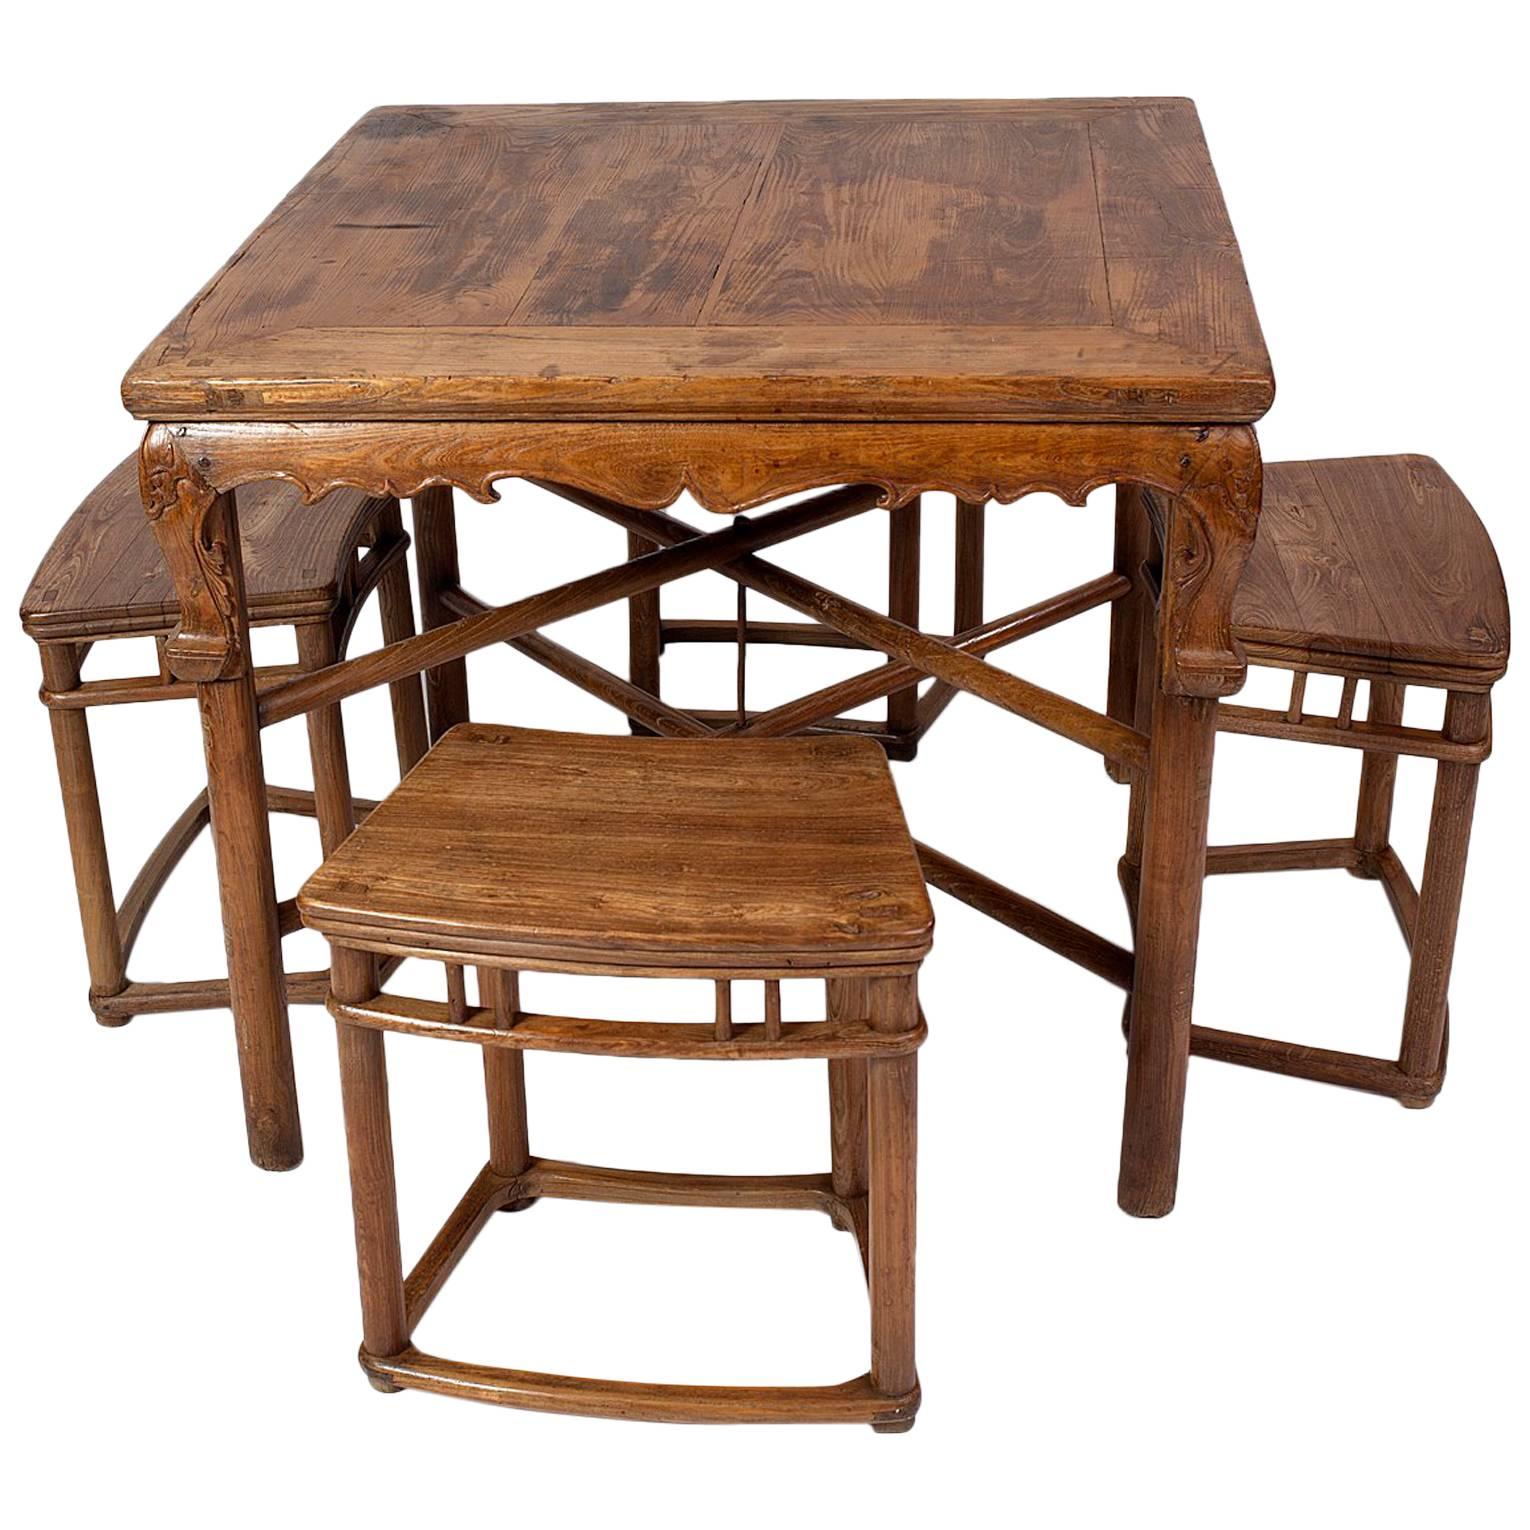 Rare Qianlong Qing Dynasty Convertible Table with Four Stools 18th Century For Sale